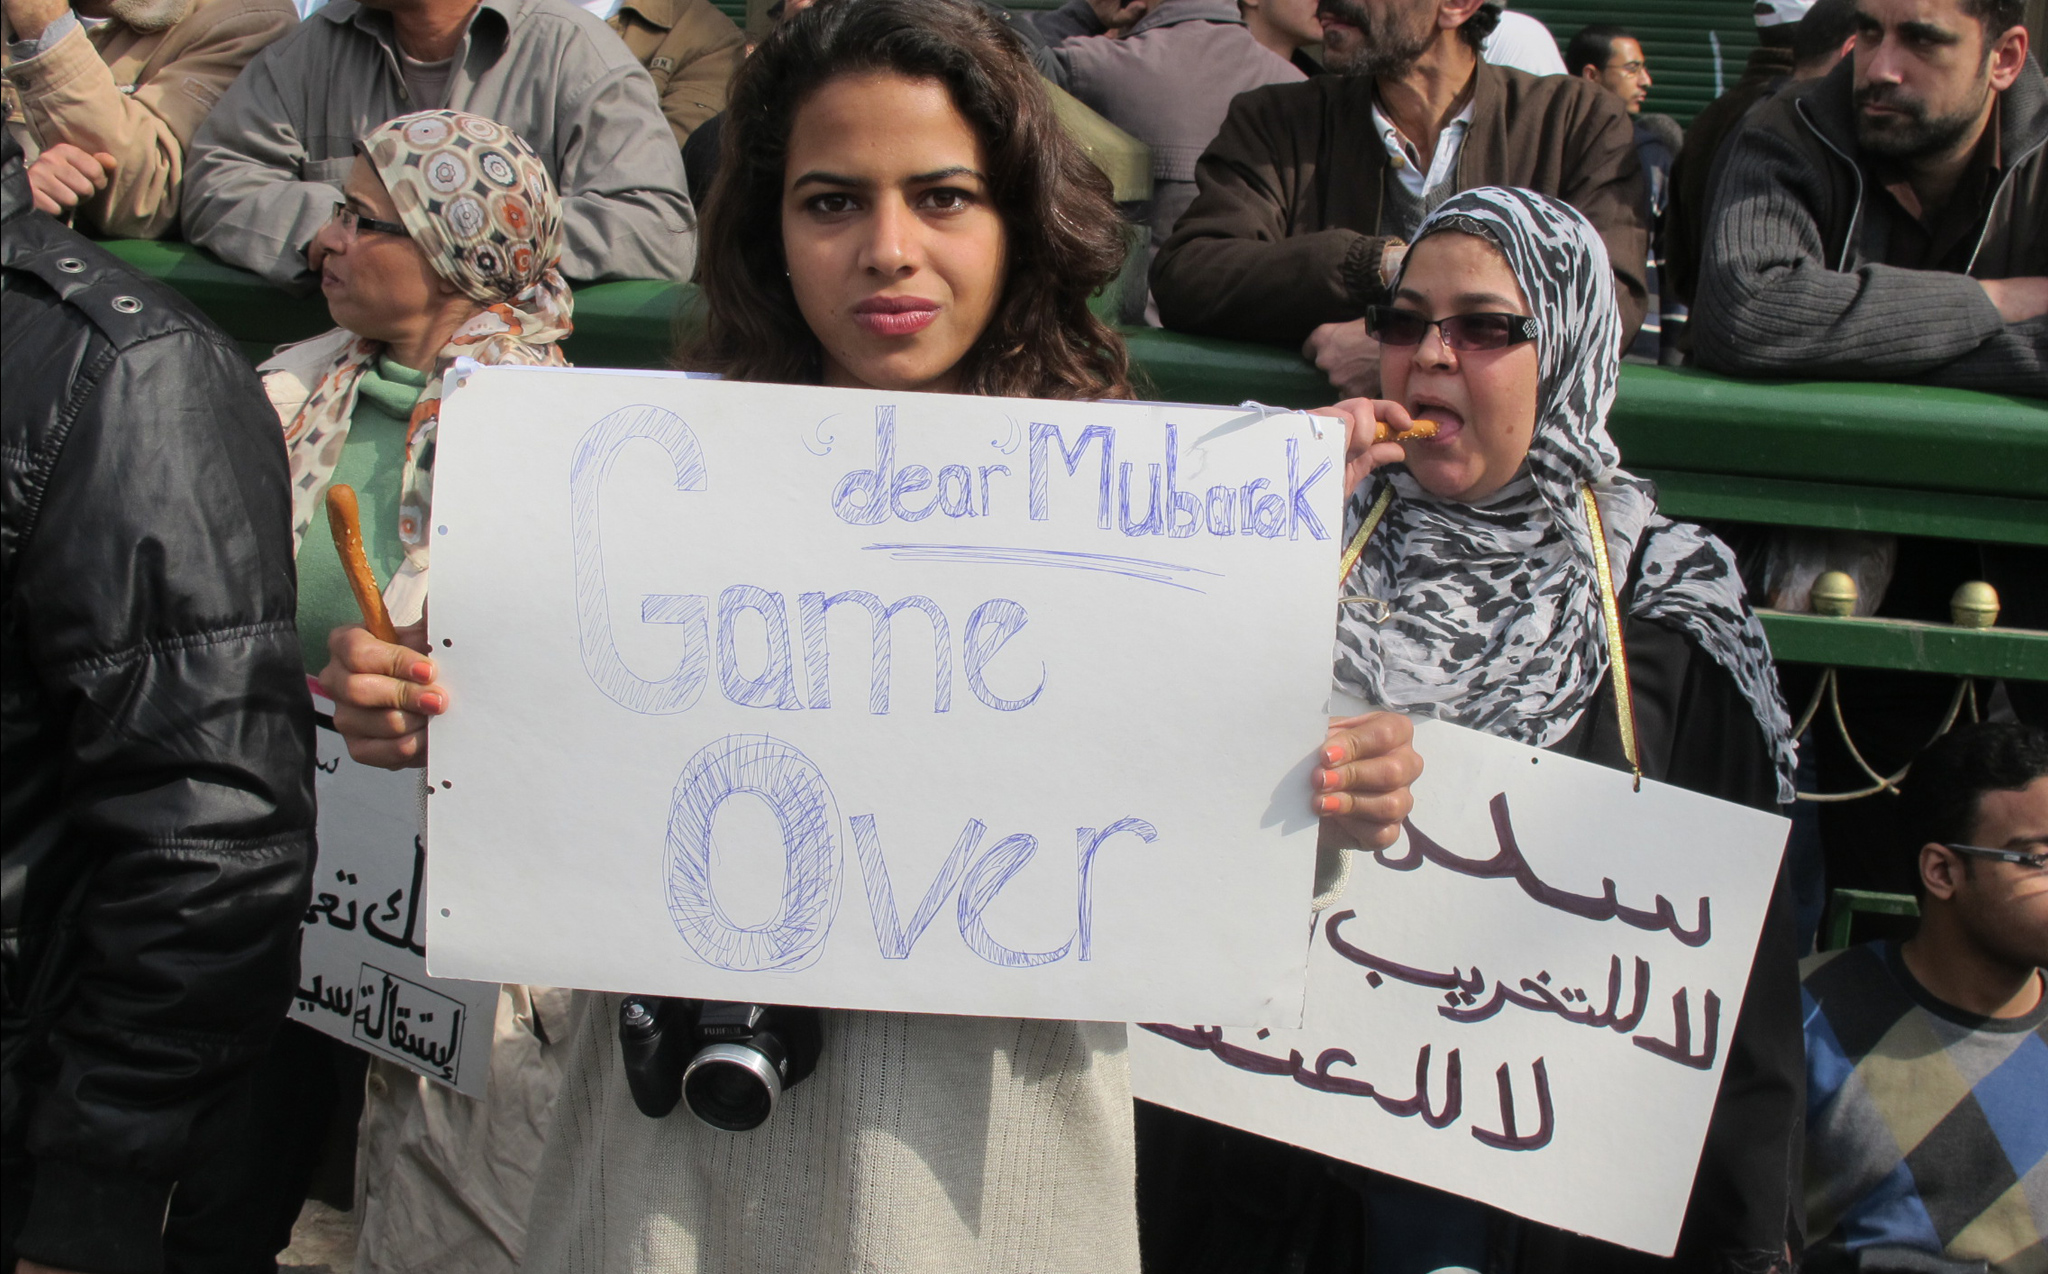 Some Egyptian women also participated in the protest.<br>
(Photo credit: Marc Daou)